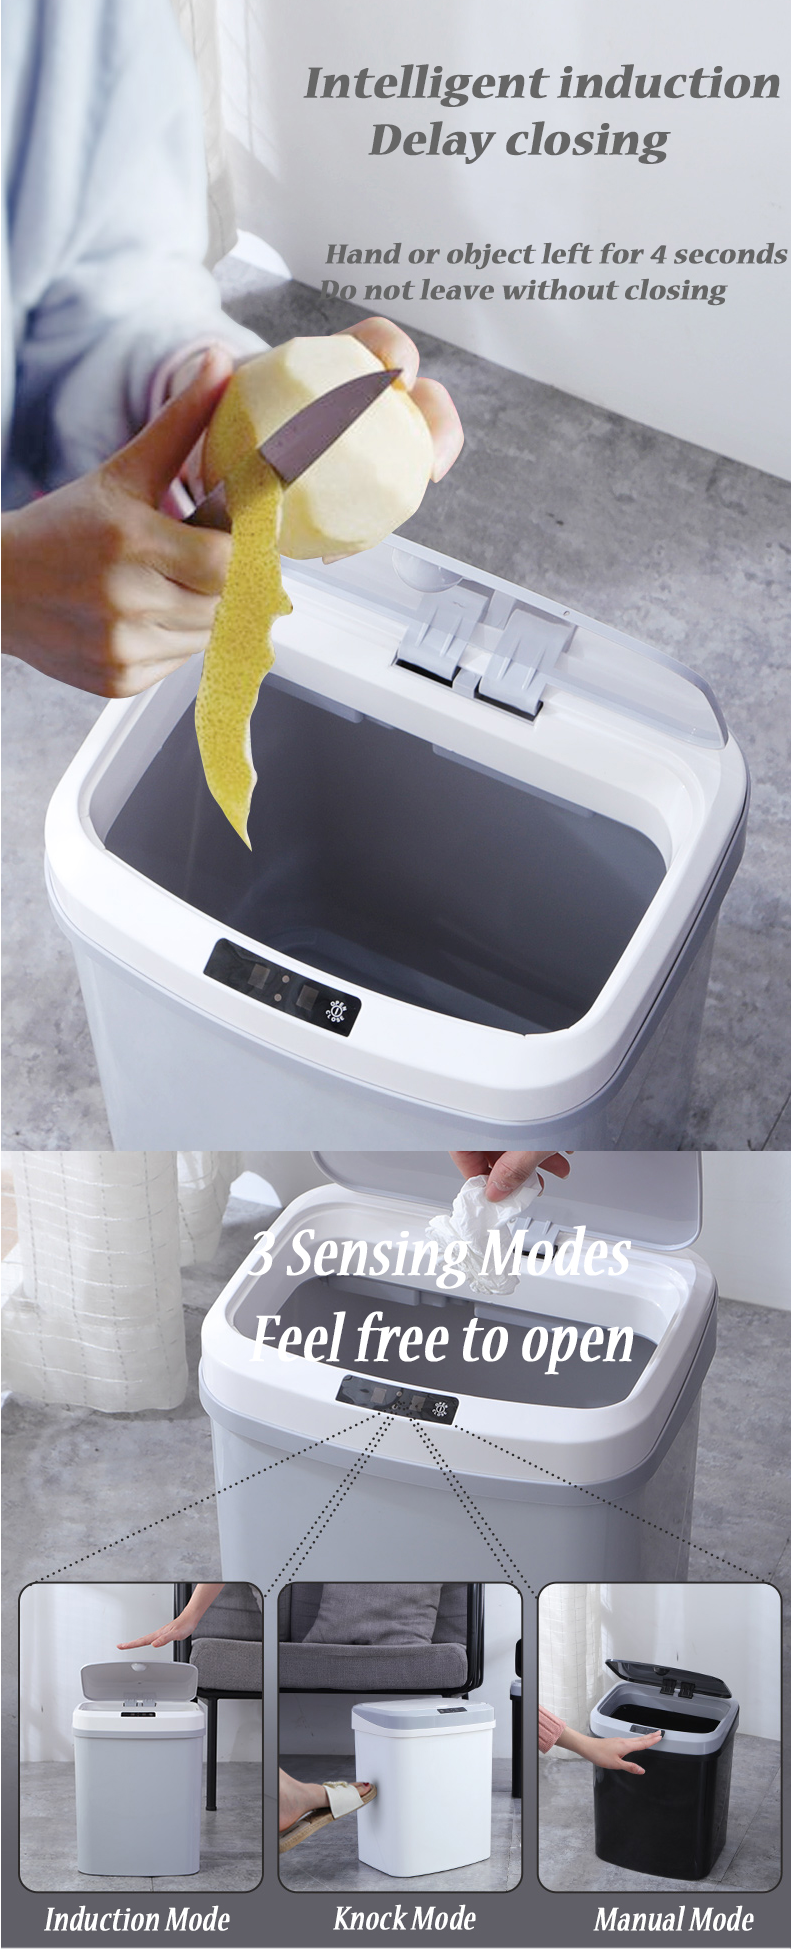 Meixun-PD-6008-14L-Intelligent-Inductive-Trash-Can-Inductive-Open-Waste-Bins-For-Office-Home-Bathroo-1566267-3